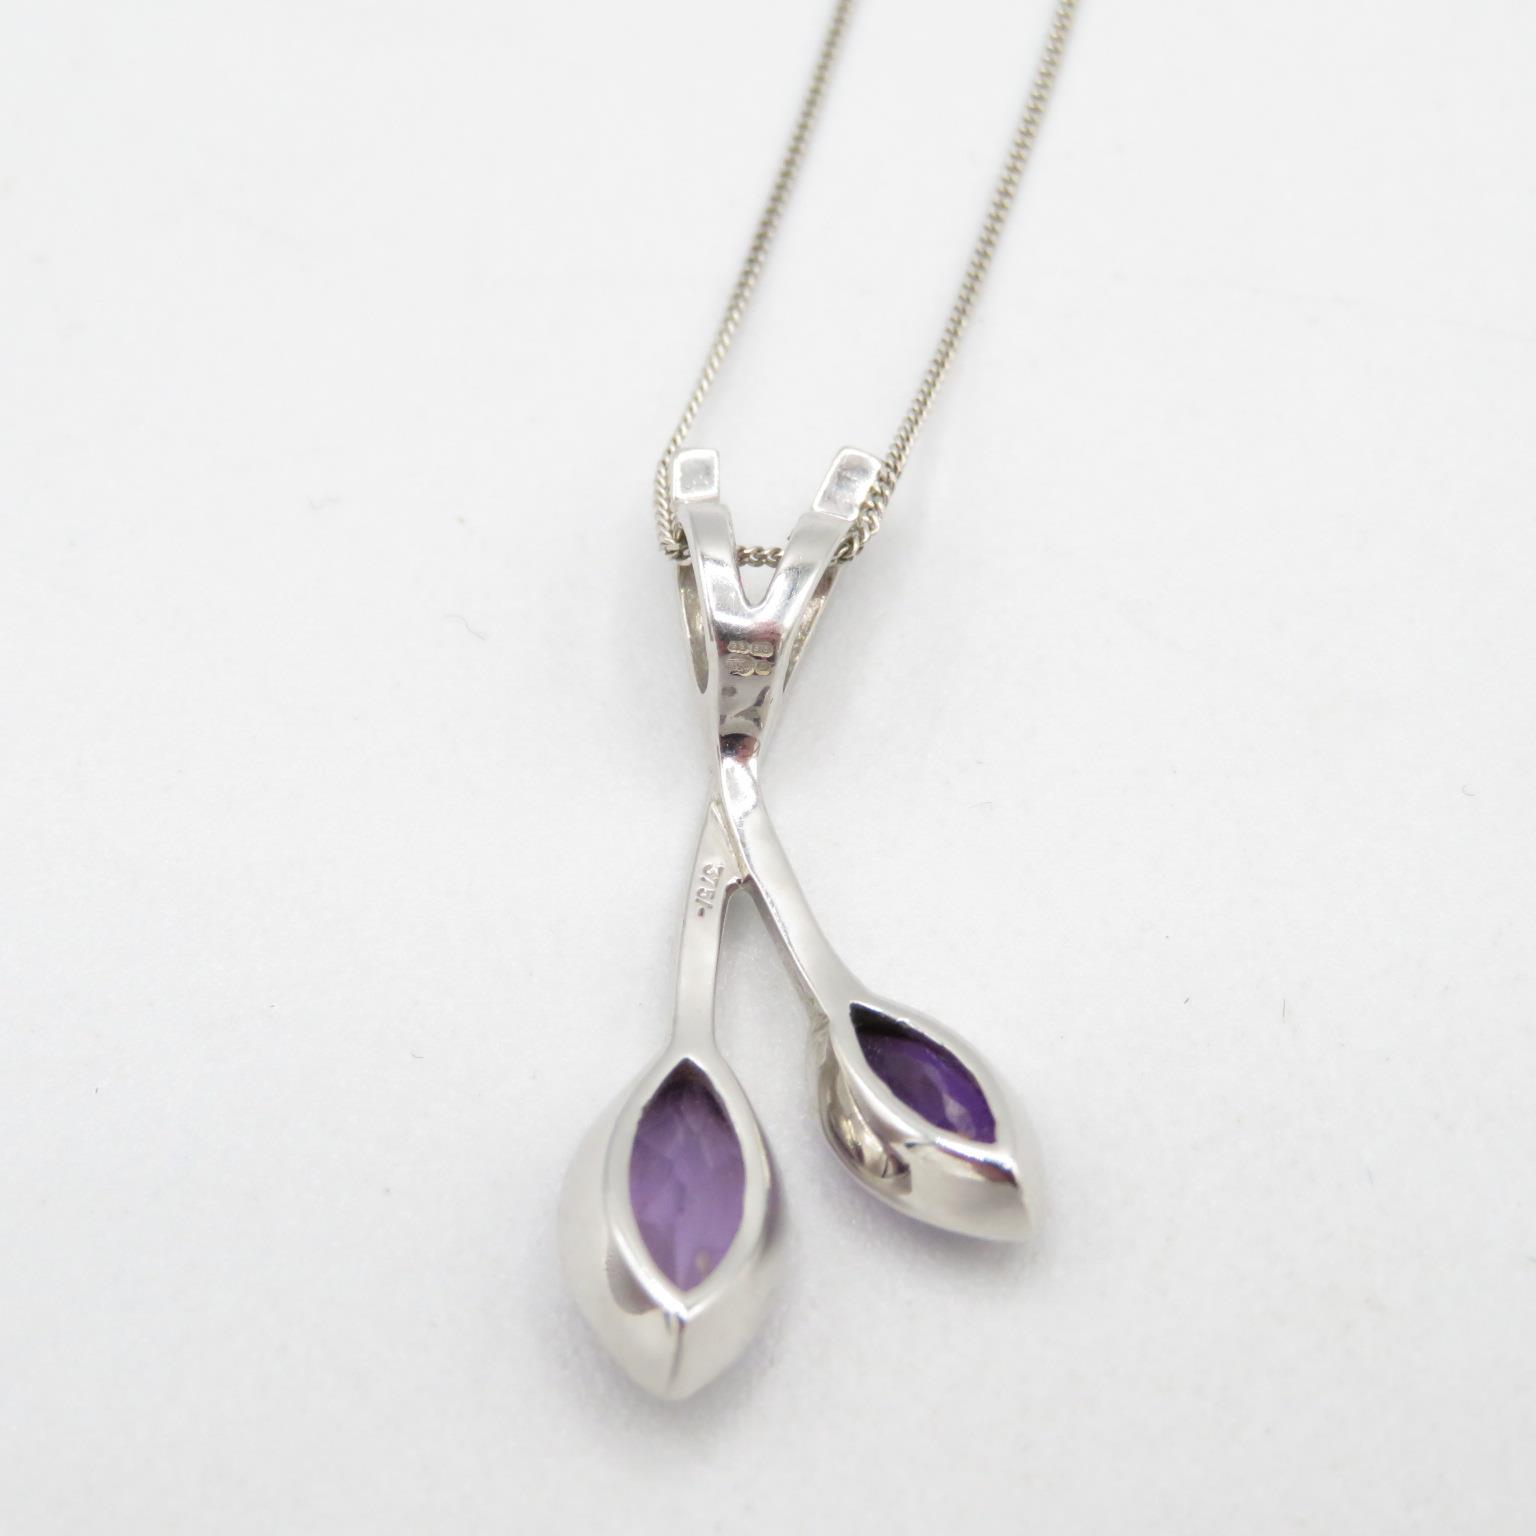 9ct white gold and amethyst pear drop pendant and chain - pendant measures 30mm long 3.6g - Bild 4 aus 5